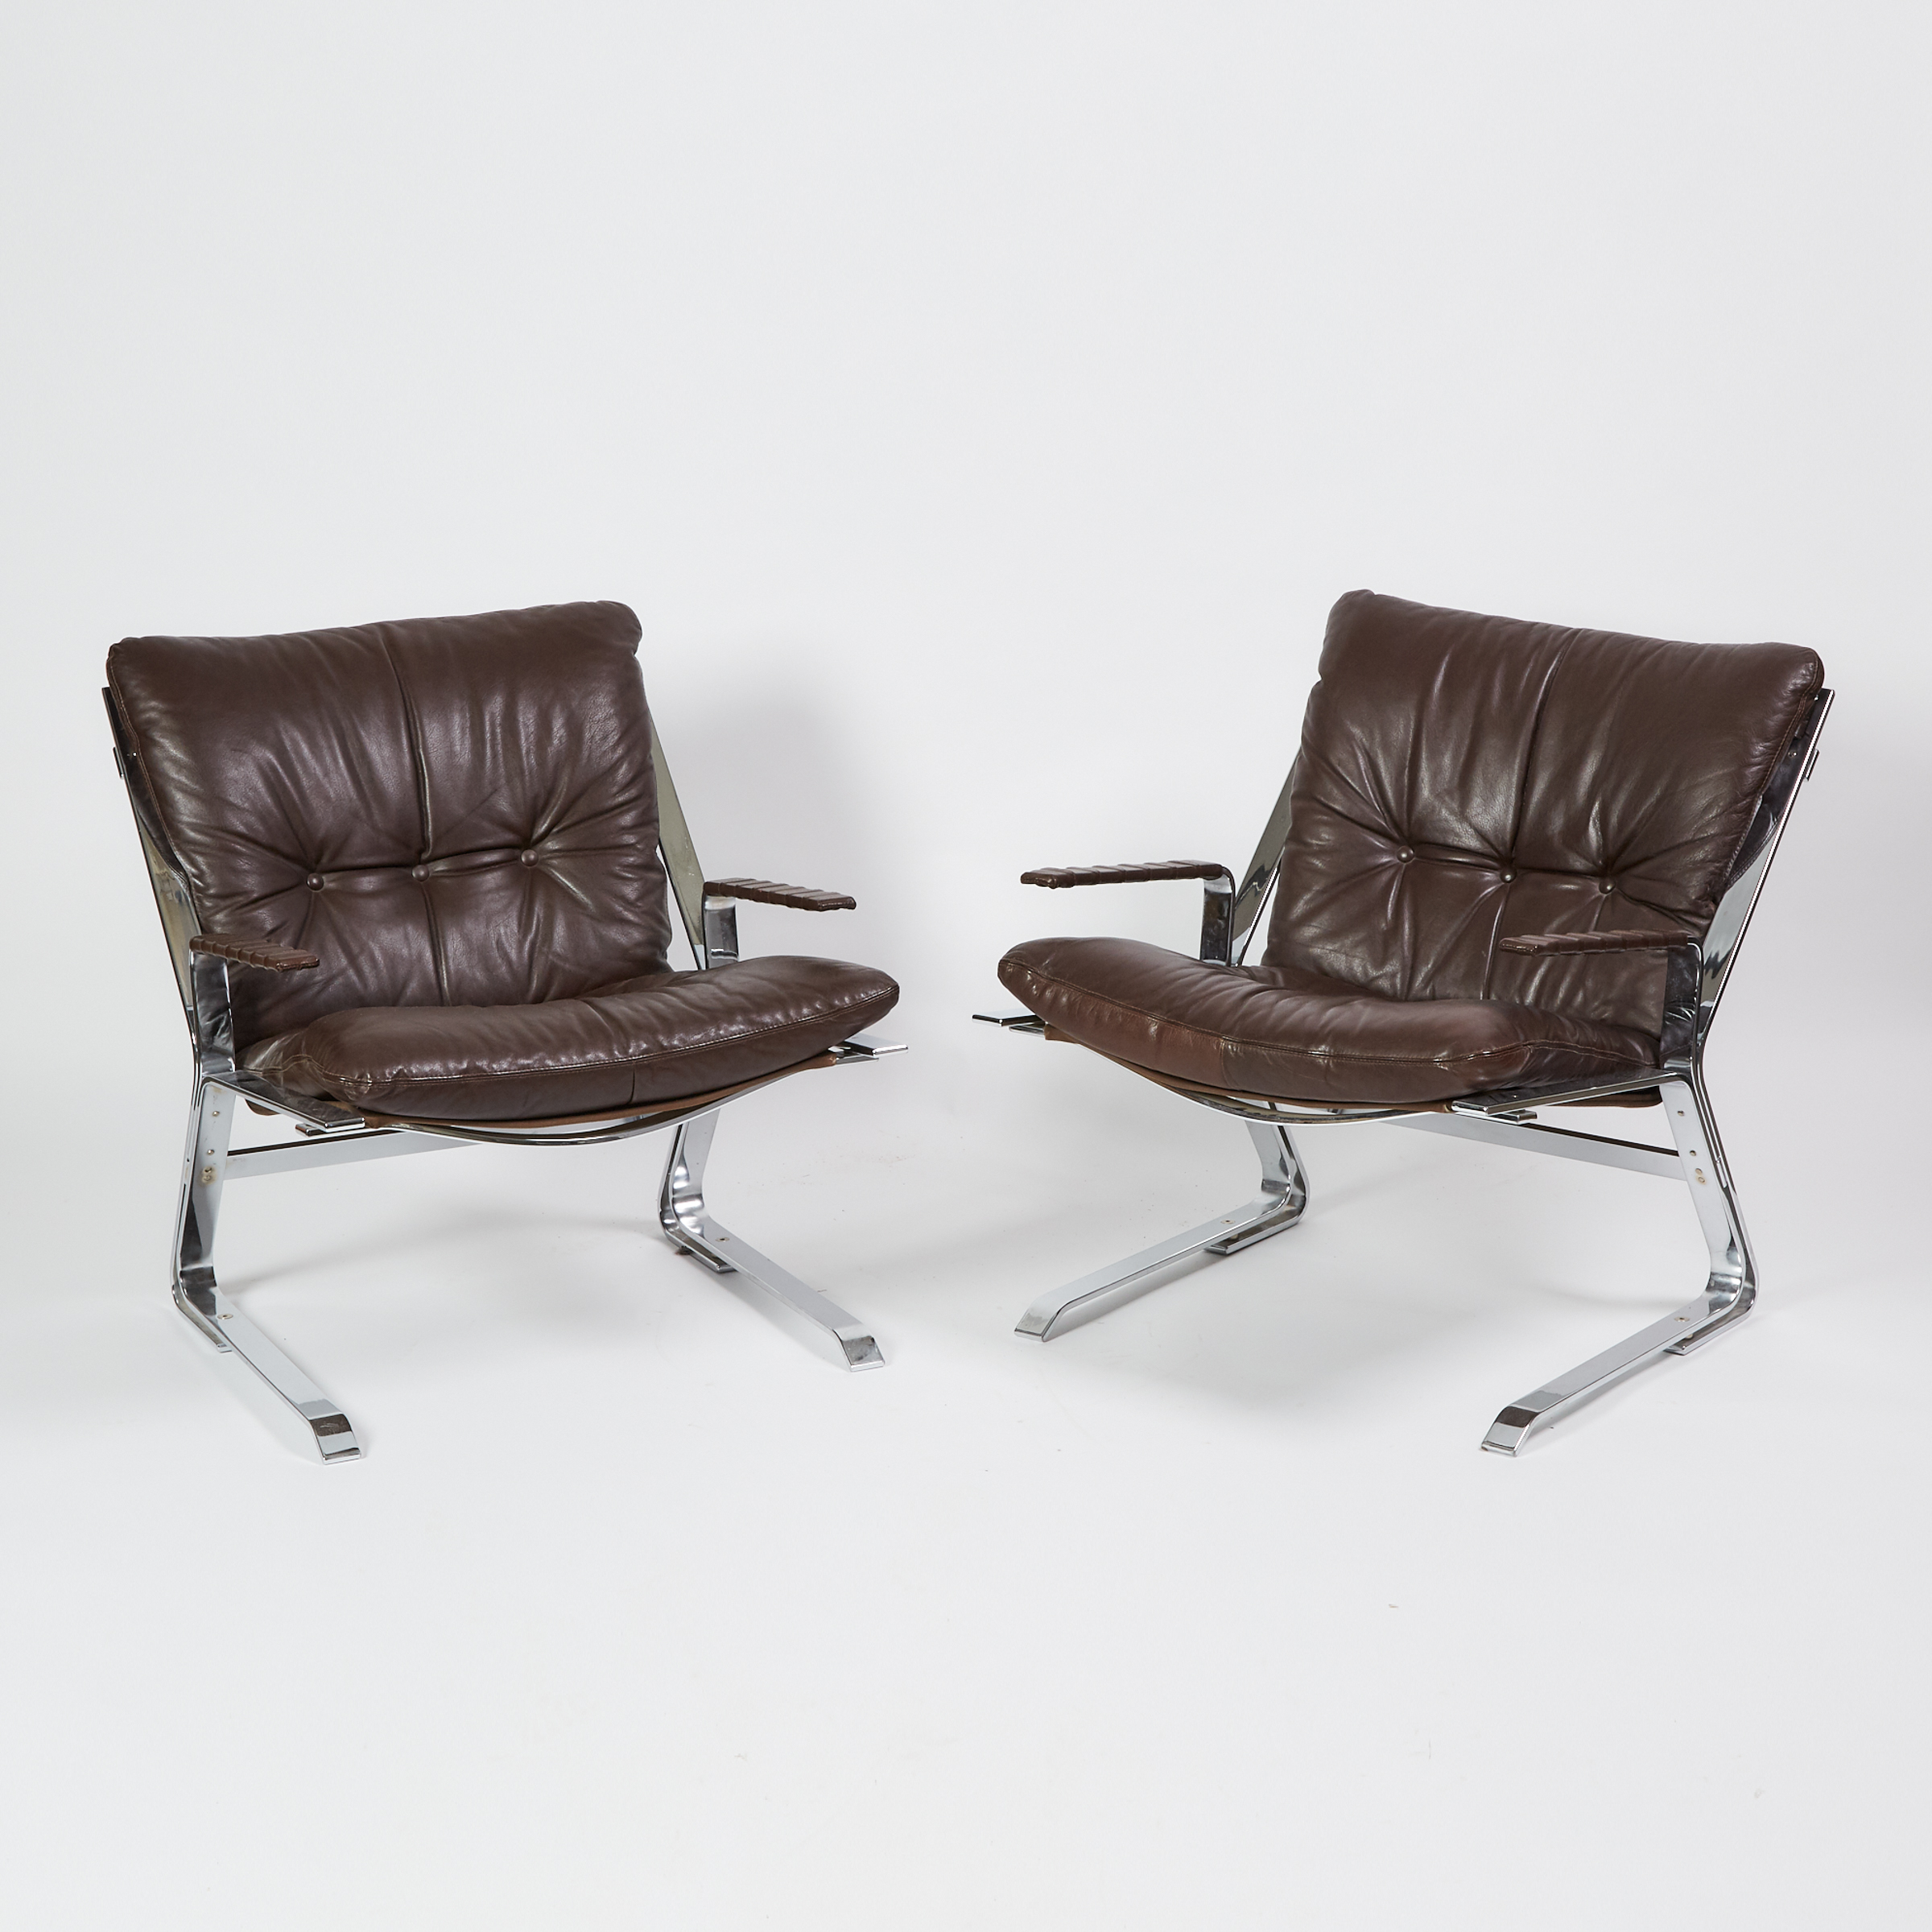 Pair of 'Pirate' Arm Chairs by Elsa & Nordahl Solheim for O.P. Rykken, 1973